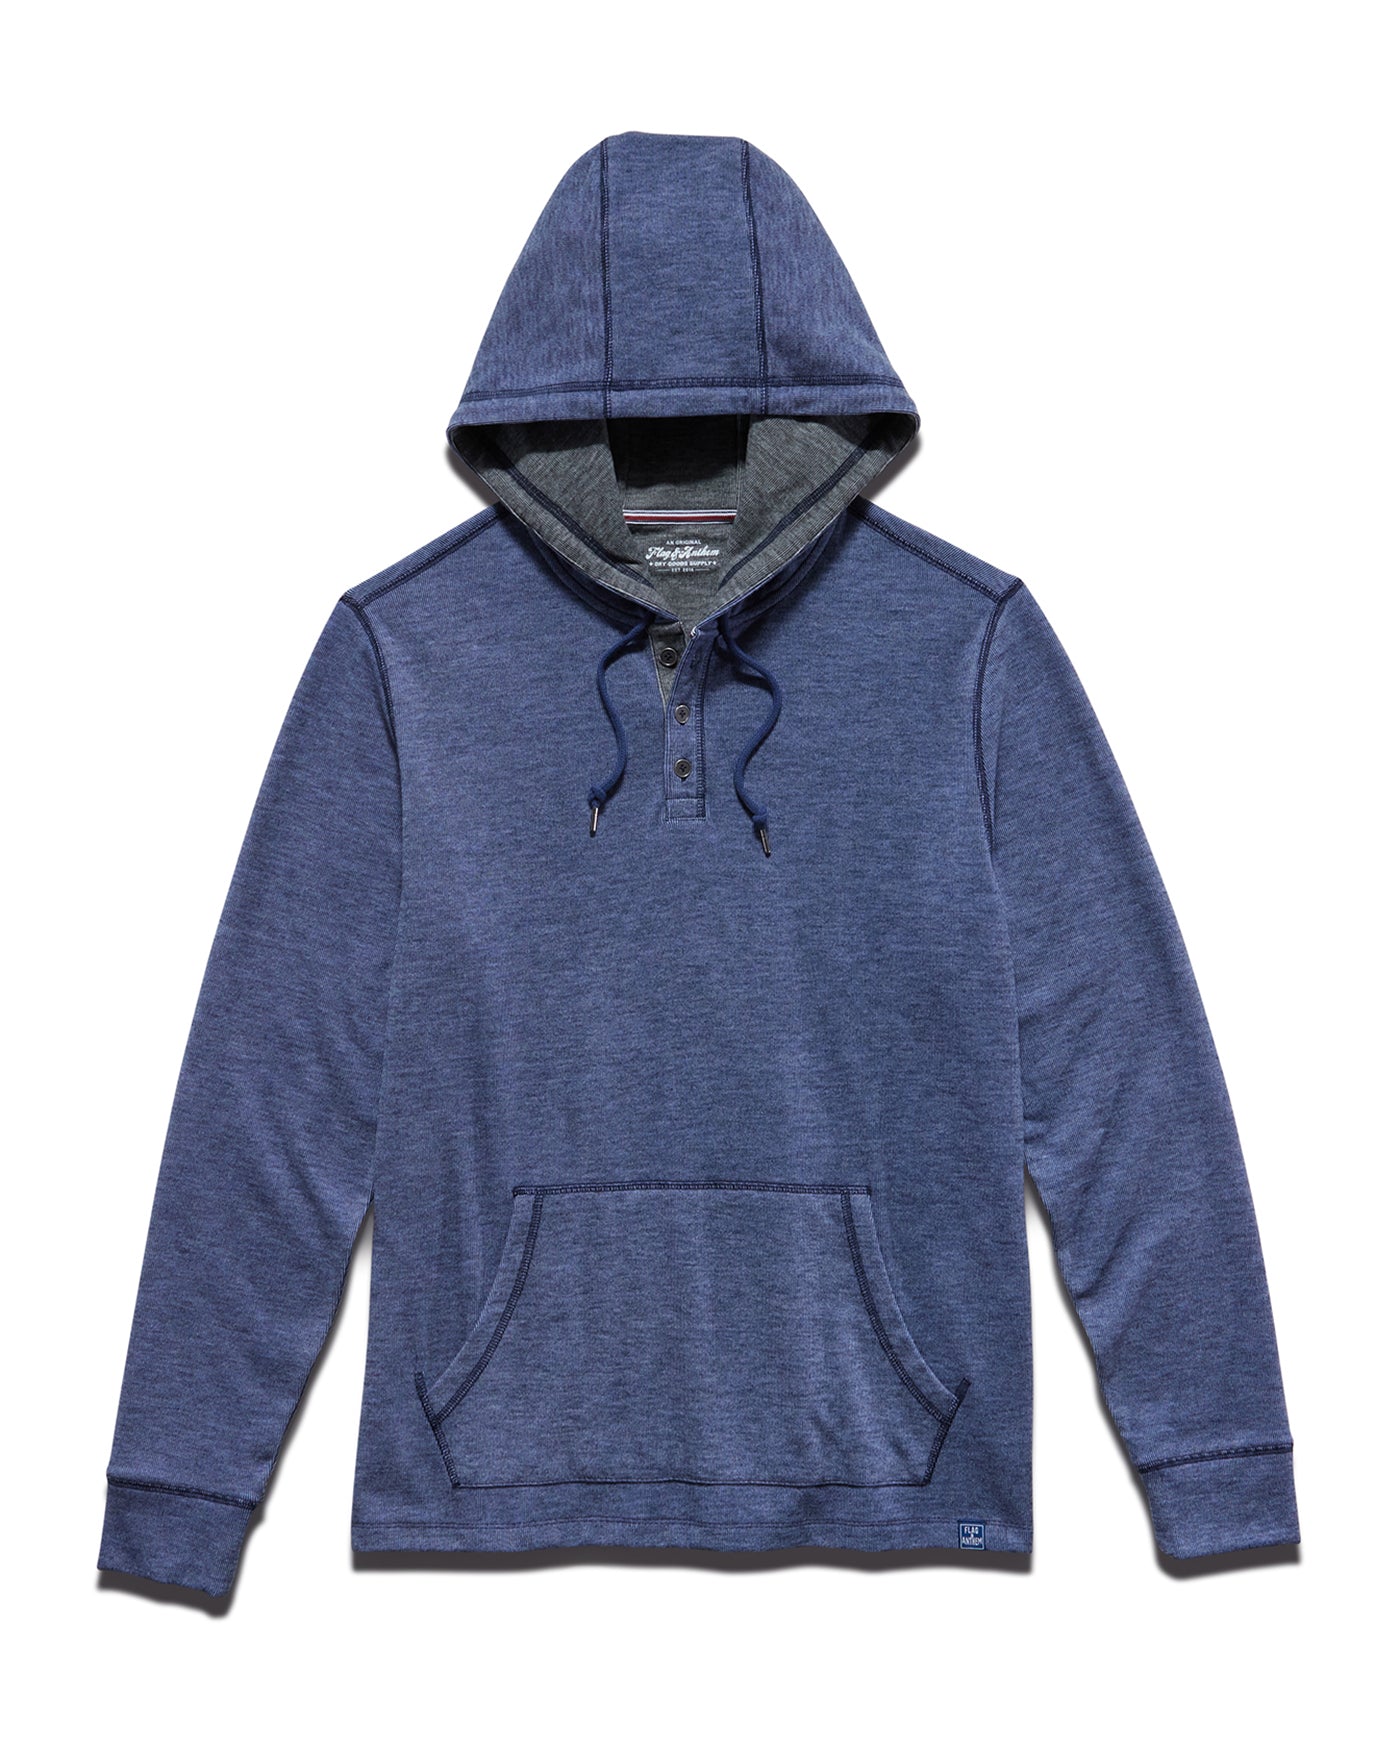 HERO TEXTURED KNIT HOODED HENLEY